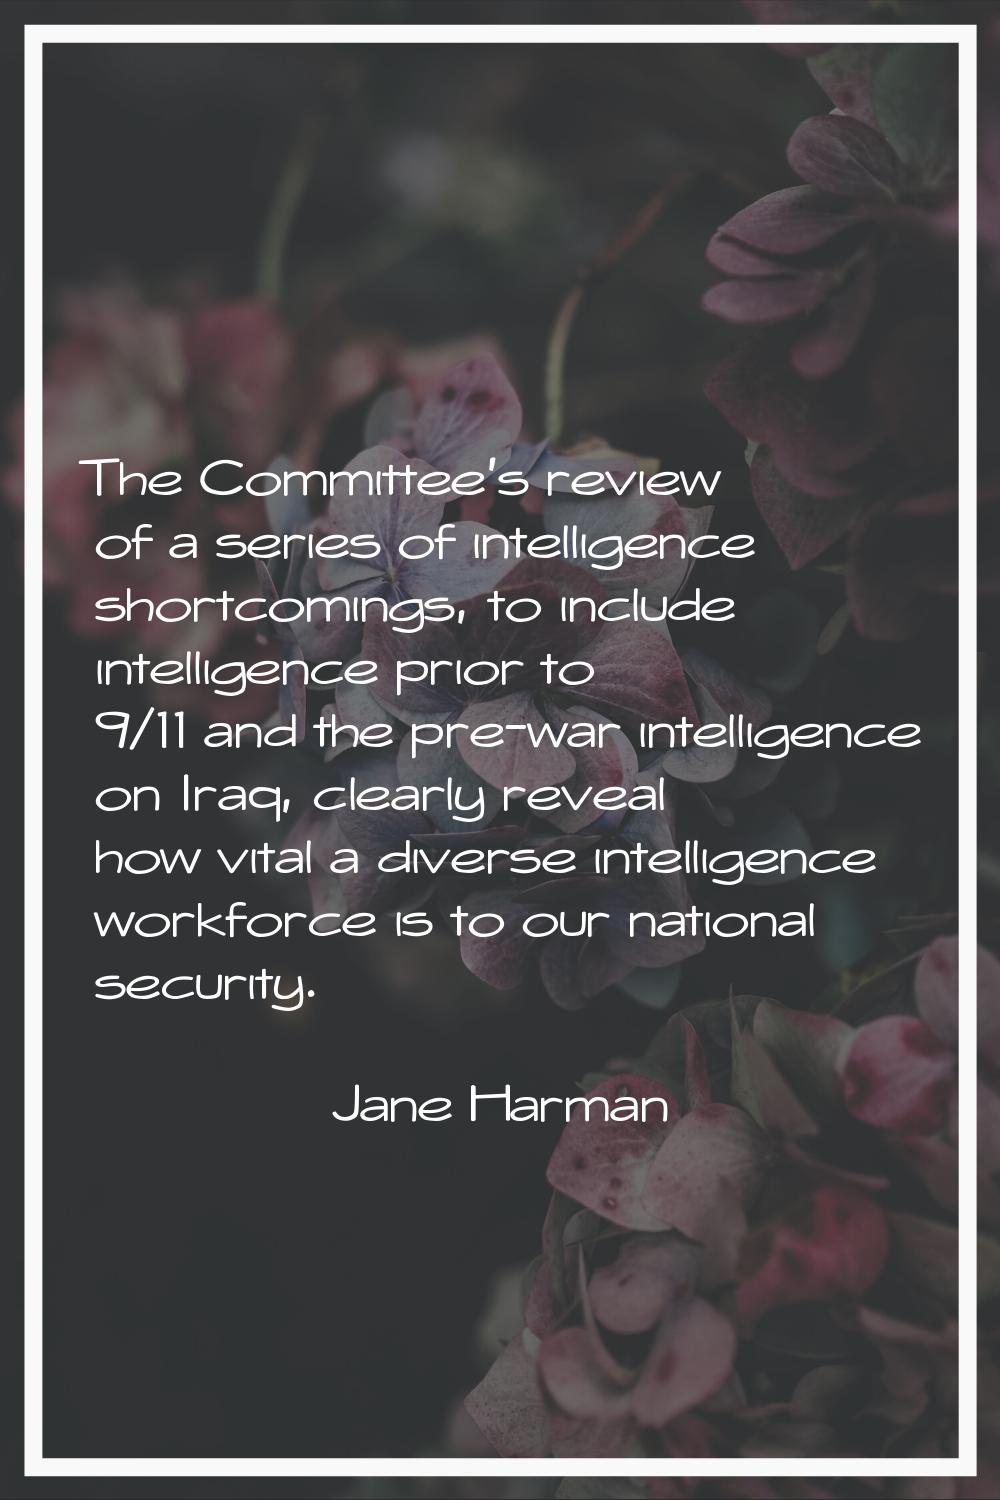 The Committee's review of a series of intelligence shortcomings, to include intelligence prior to 9